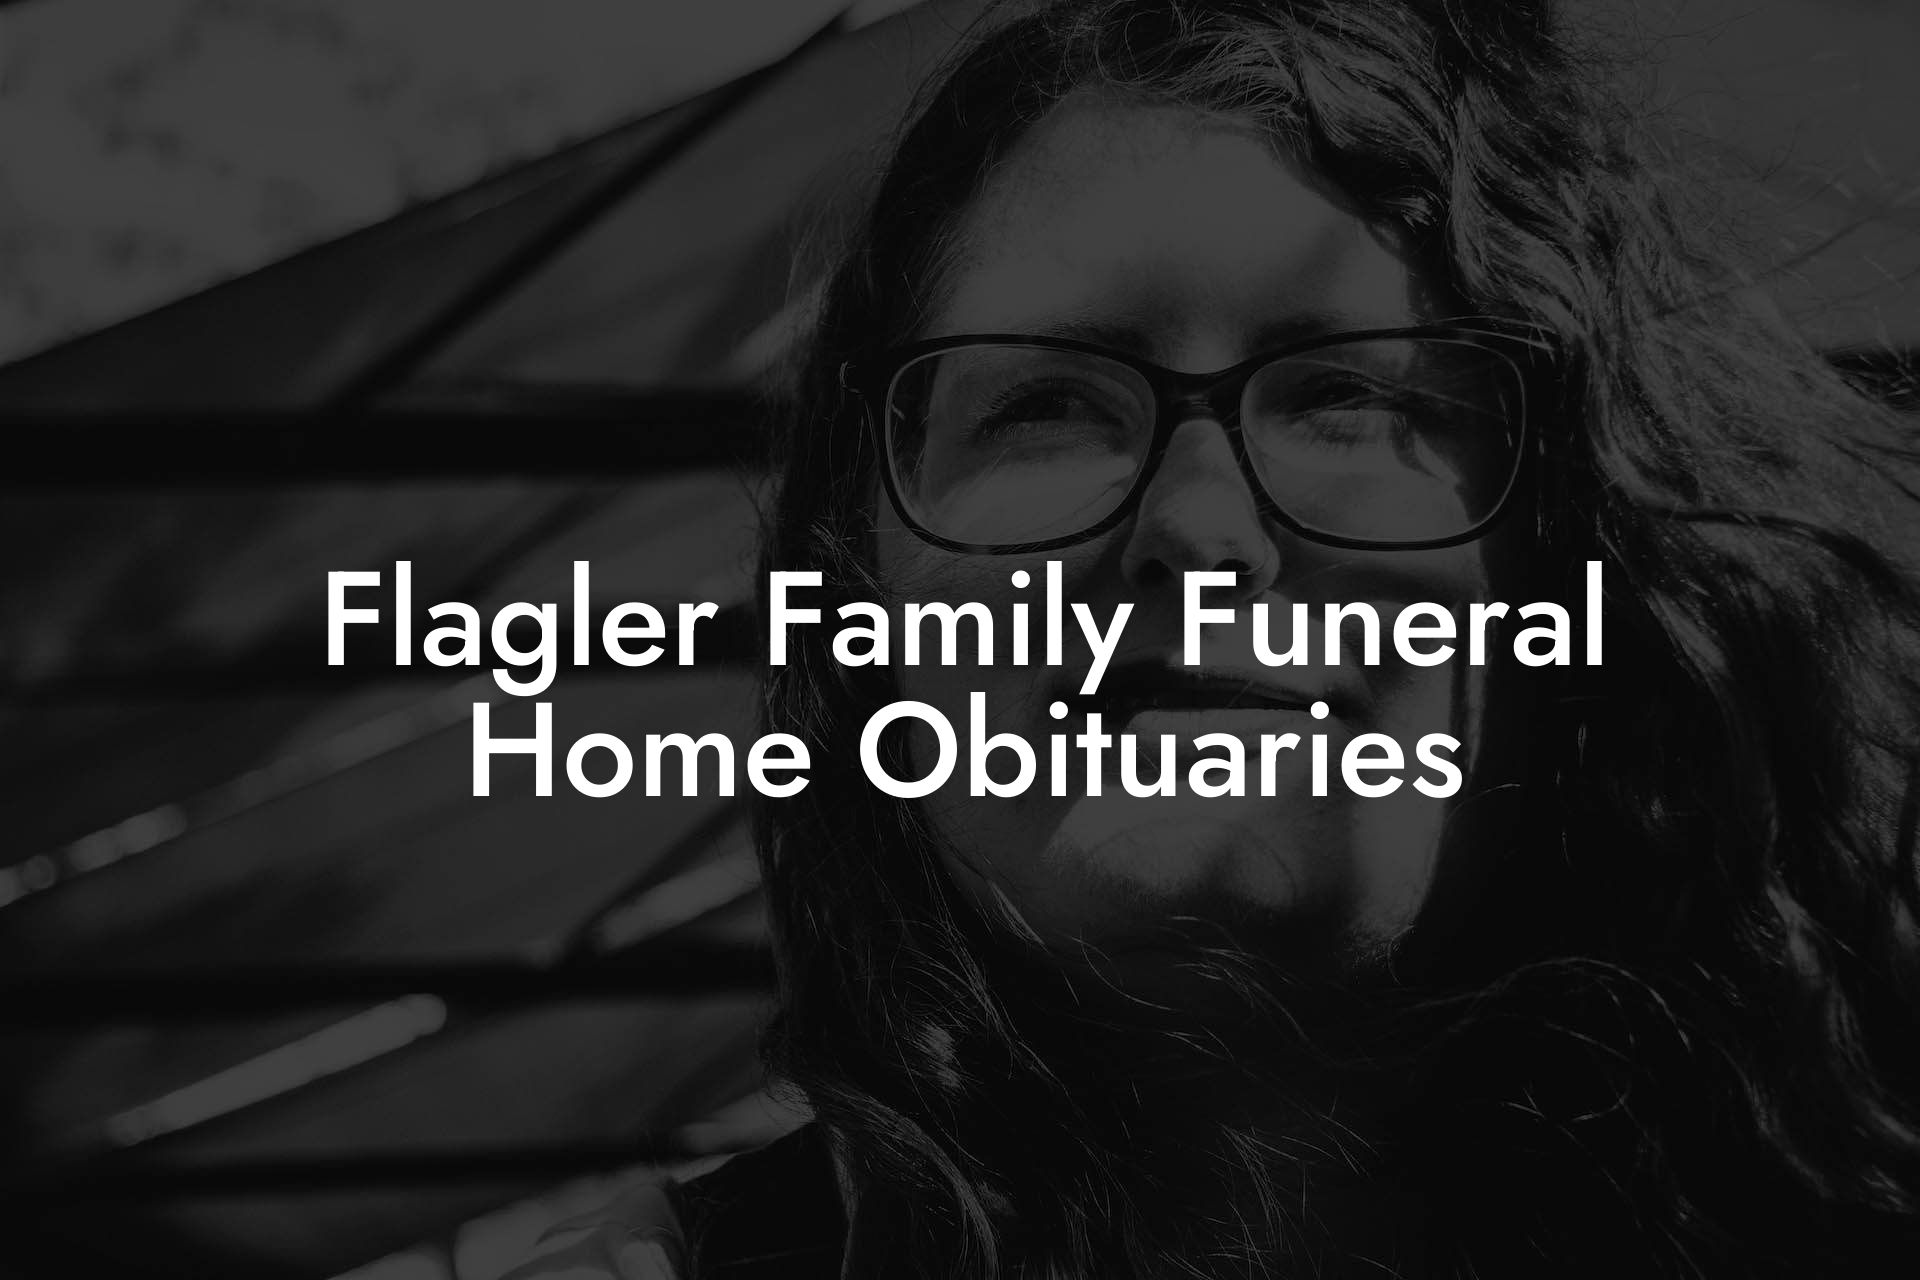 Flagler Family Funeral Home Obituaries